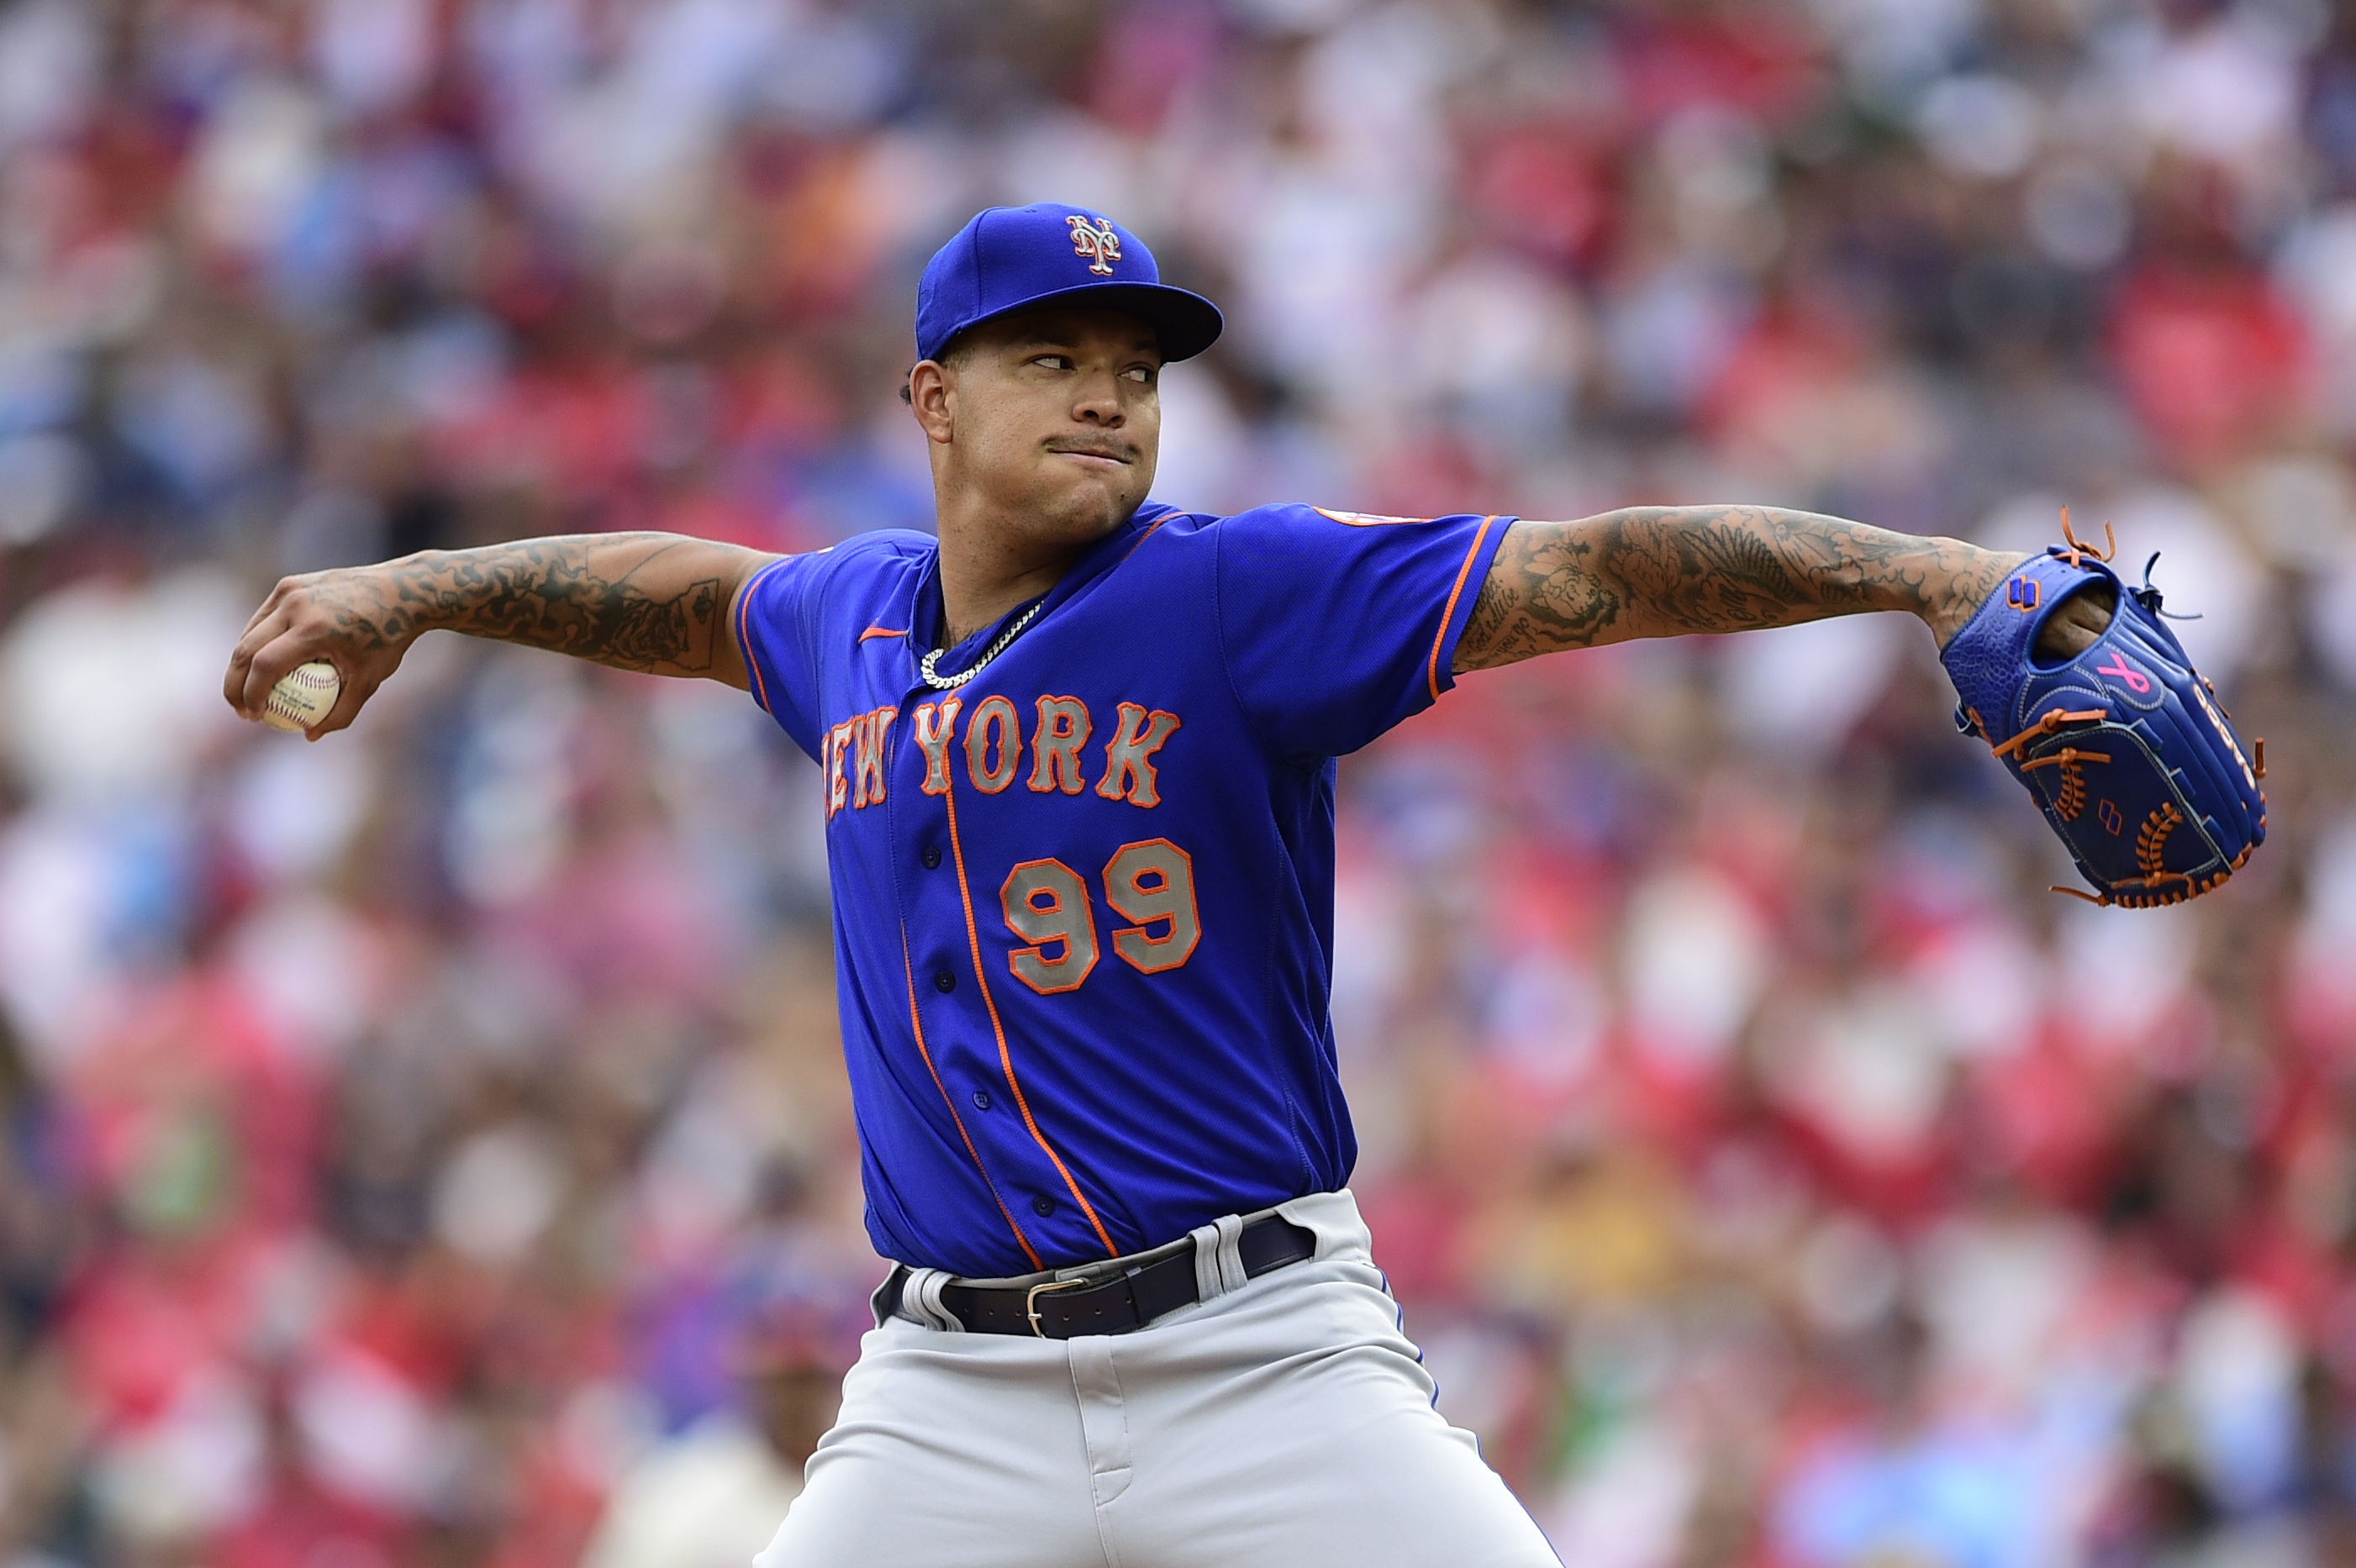 Mets shortstop Javy Baez day-to-day with left hip tightness